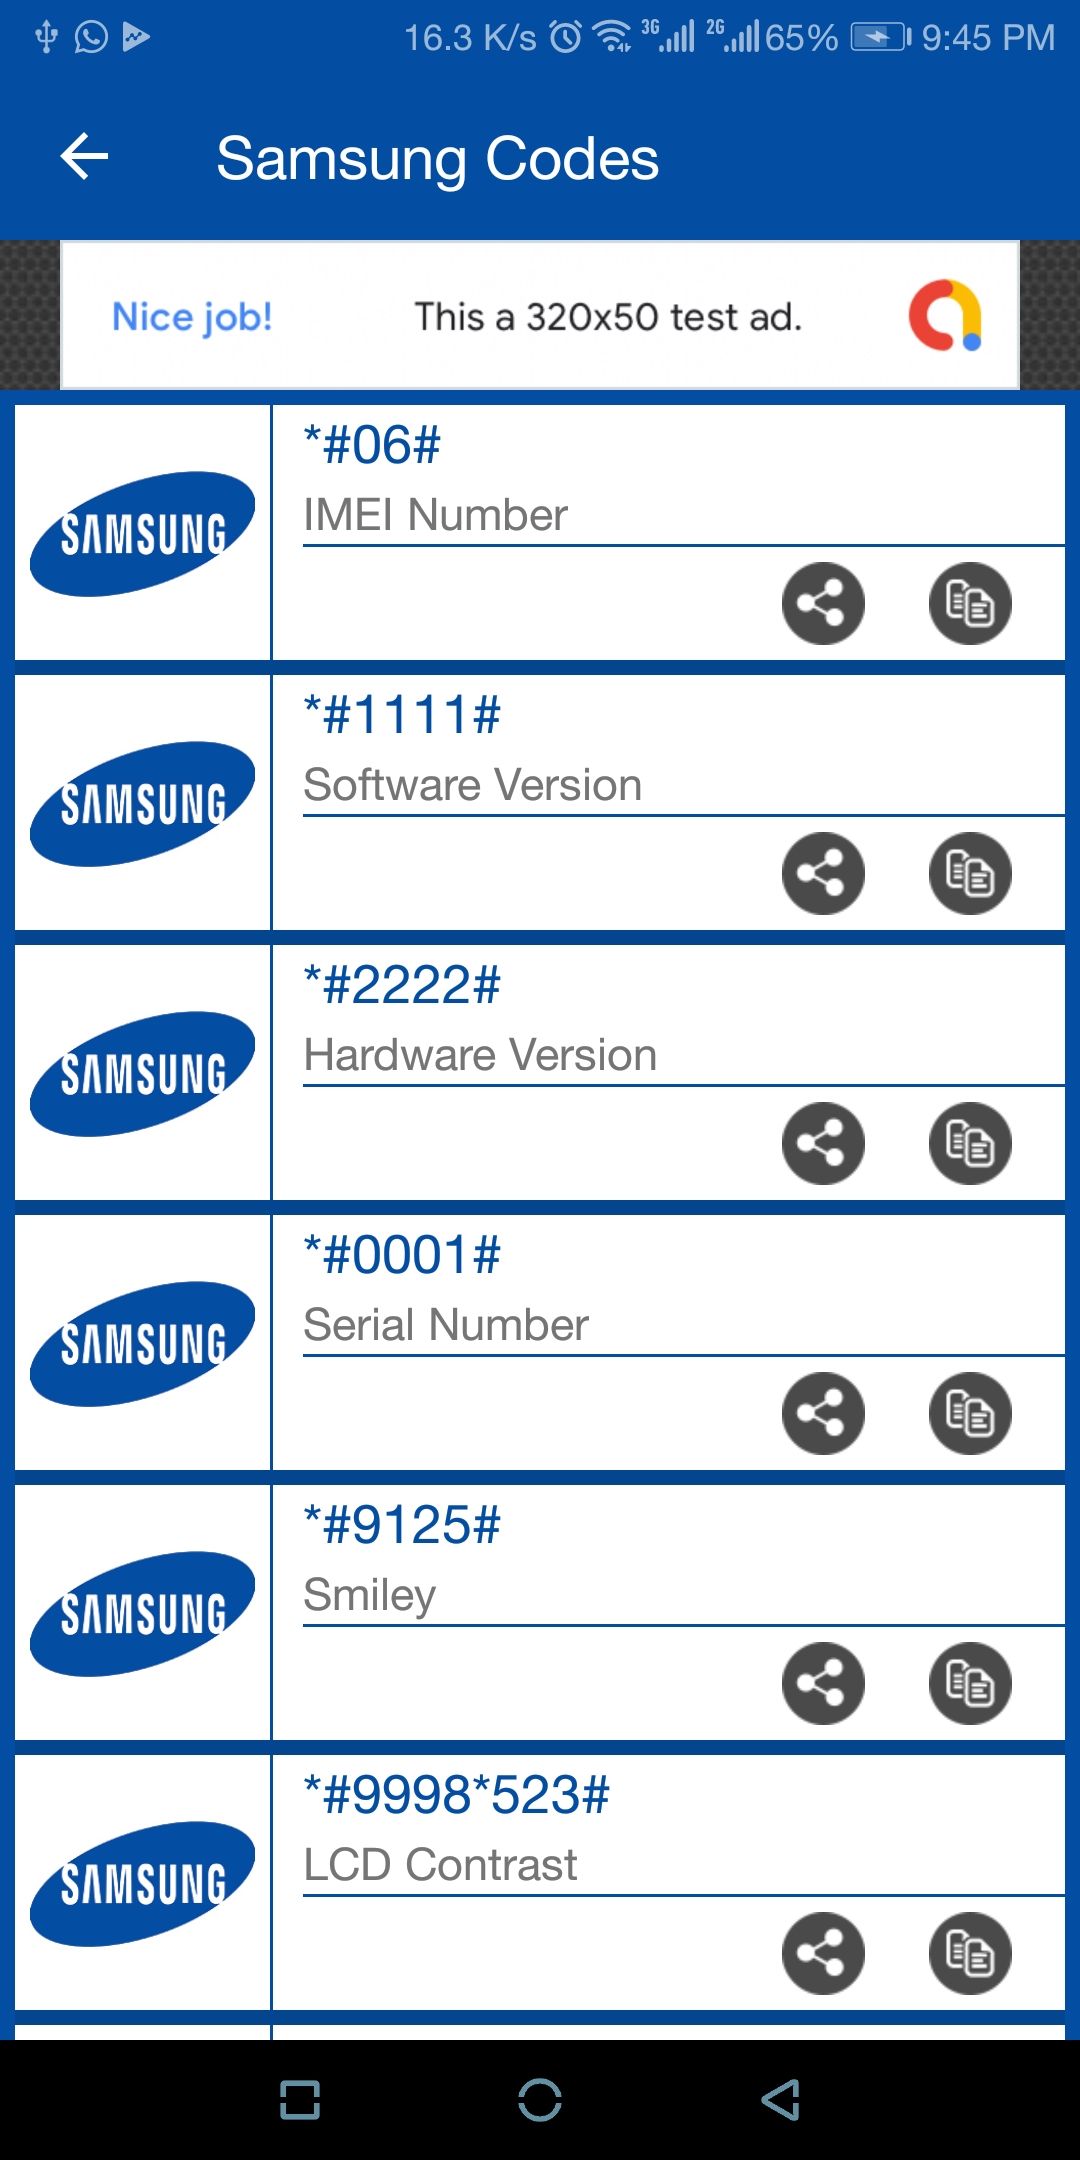 Samsung Secret Codes Android Source Code by Nadeemtaj5 